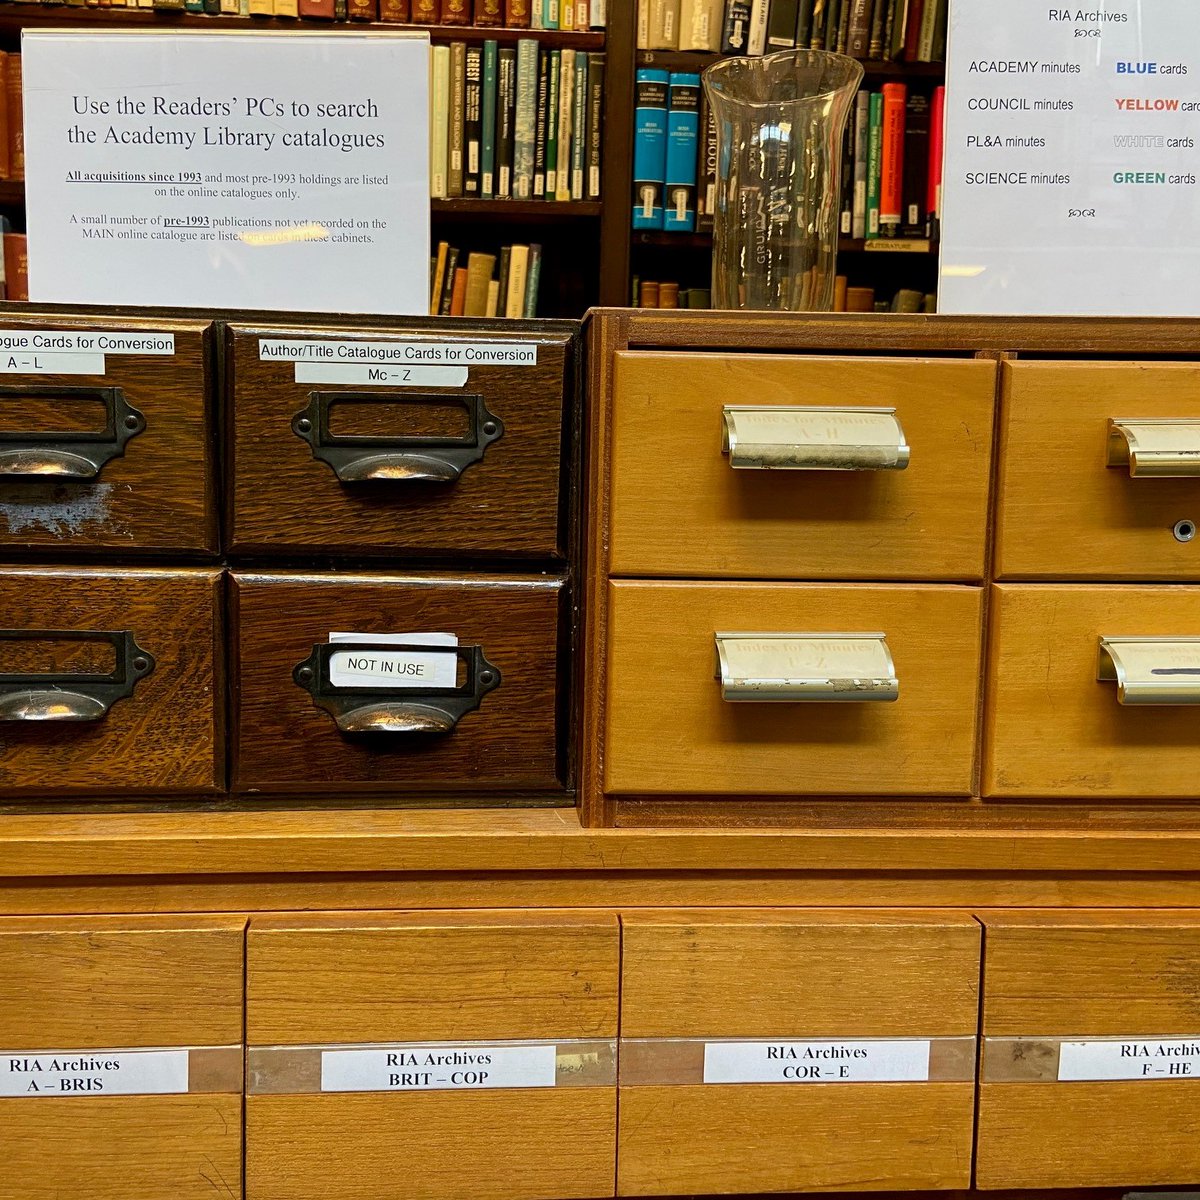 Keeping @RIAdawson Archive of records, minutes and proceedings from members, staff and the Irish Academy community since 1785! 

#EYALocal #EYADay @explorearchives @ARAIreland @ARAUK_IE @ARAScot @ARALearning @ArchiveHashtag